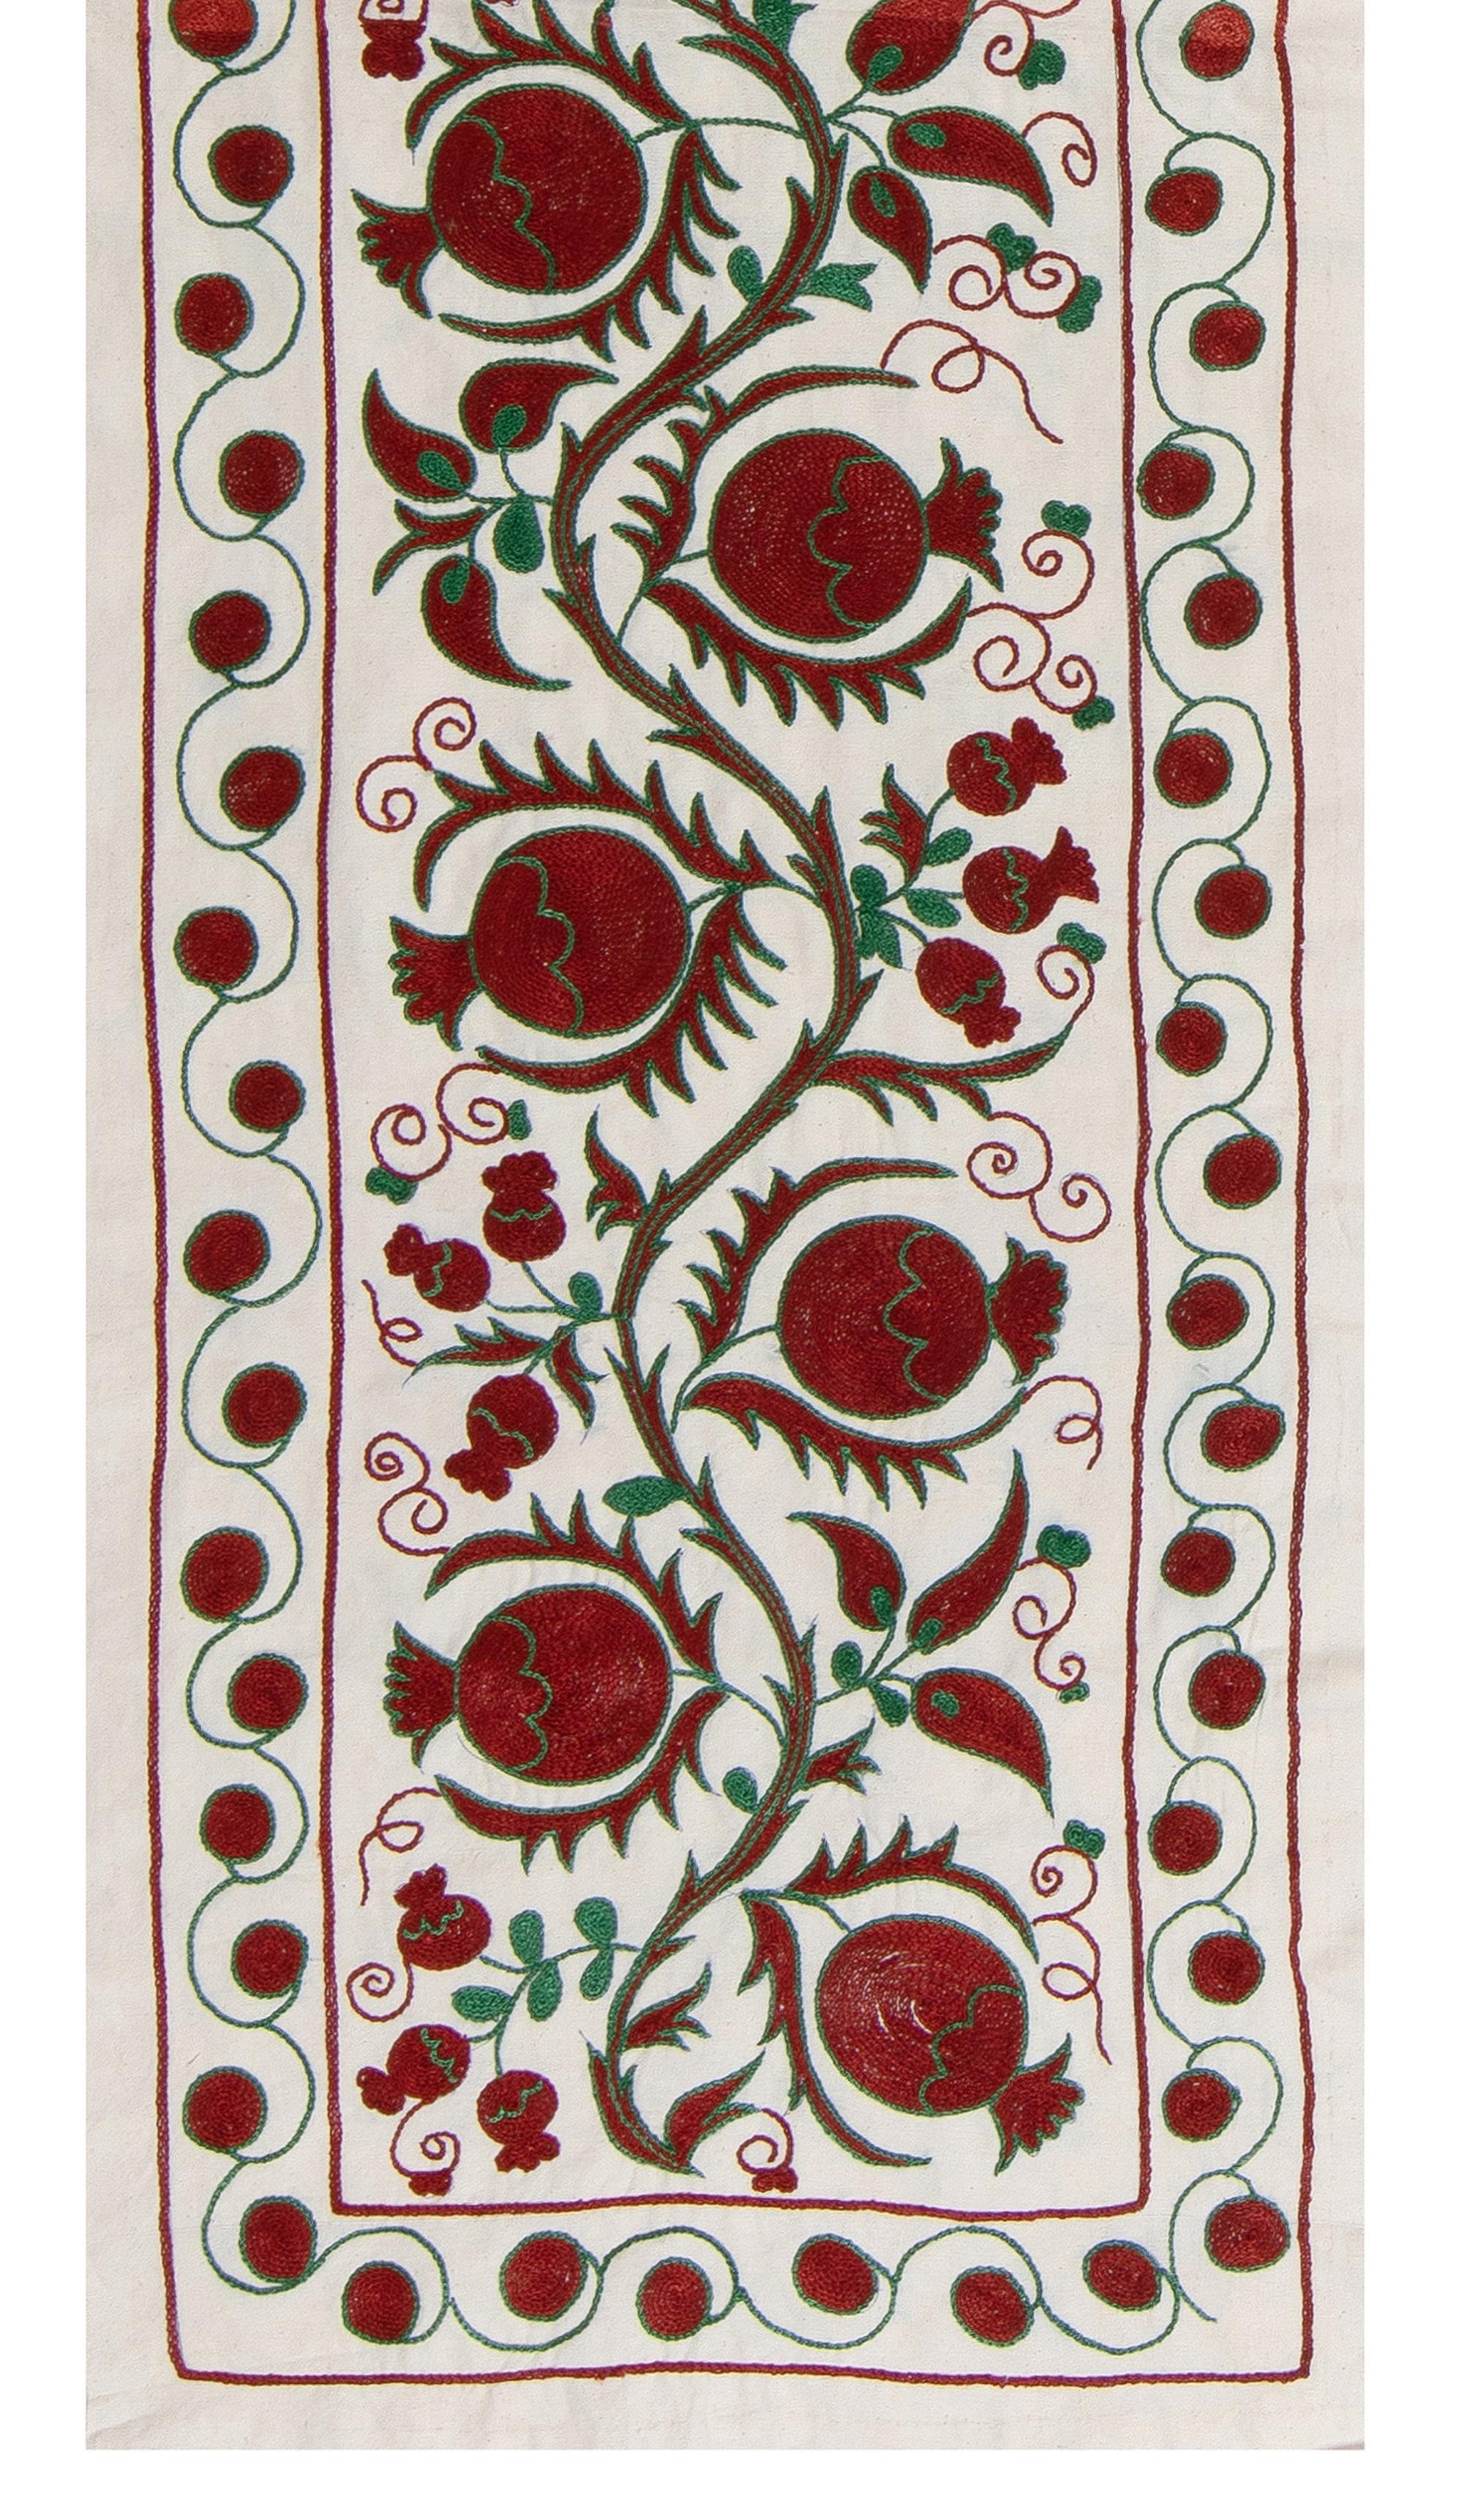 Embroidered 1.7x6 Ft Decorative Uzbek Suzani Wall Hanging, Silk Hand Embroidery Table Runner